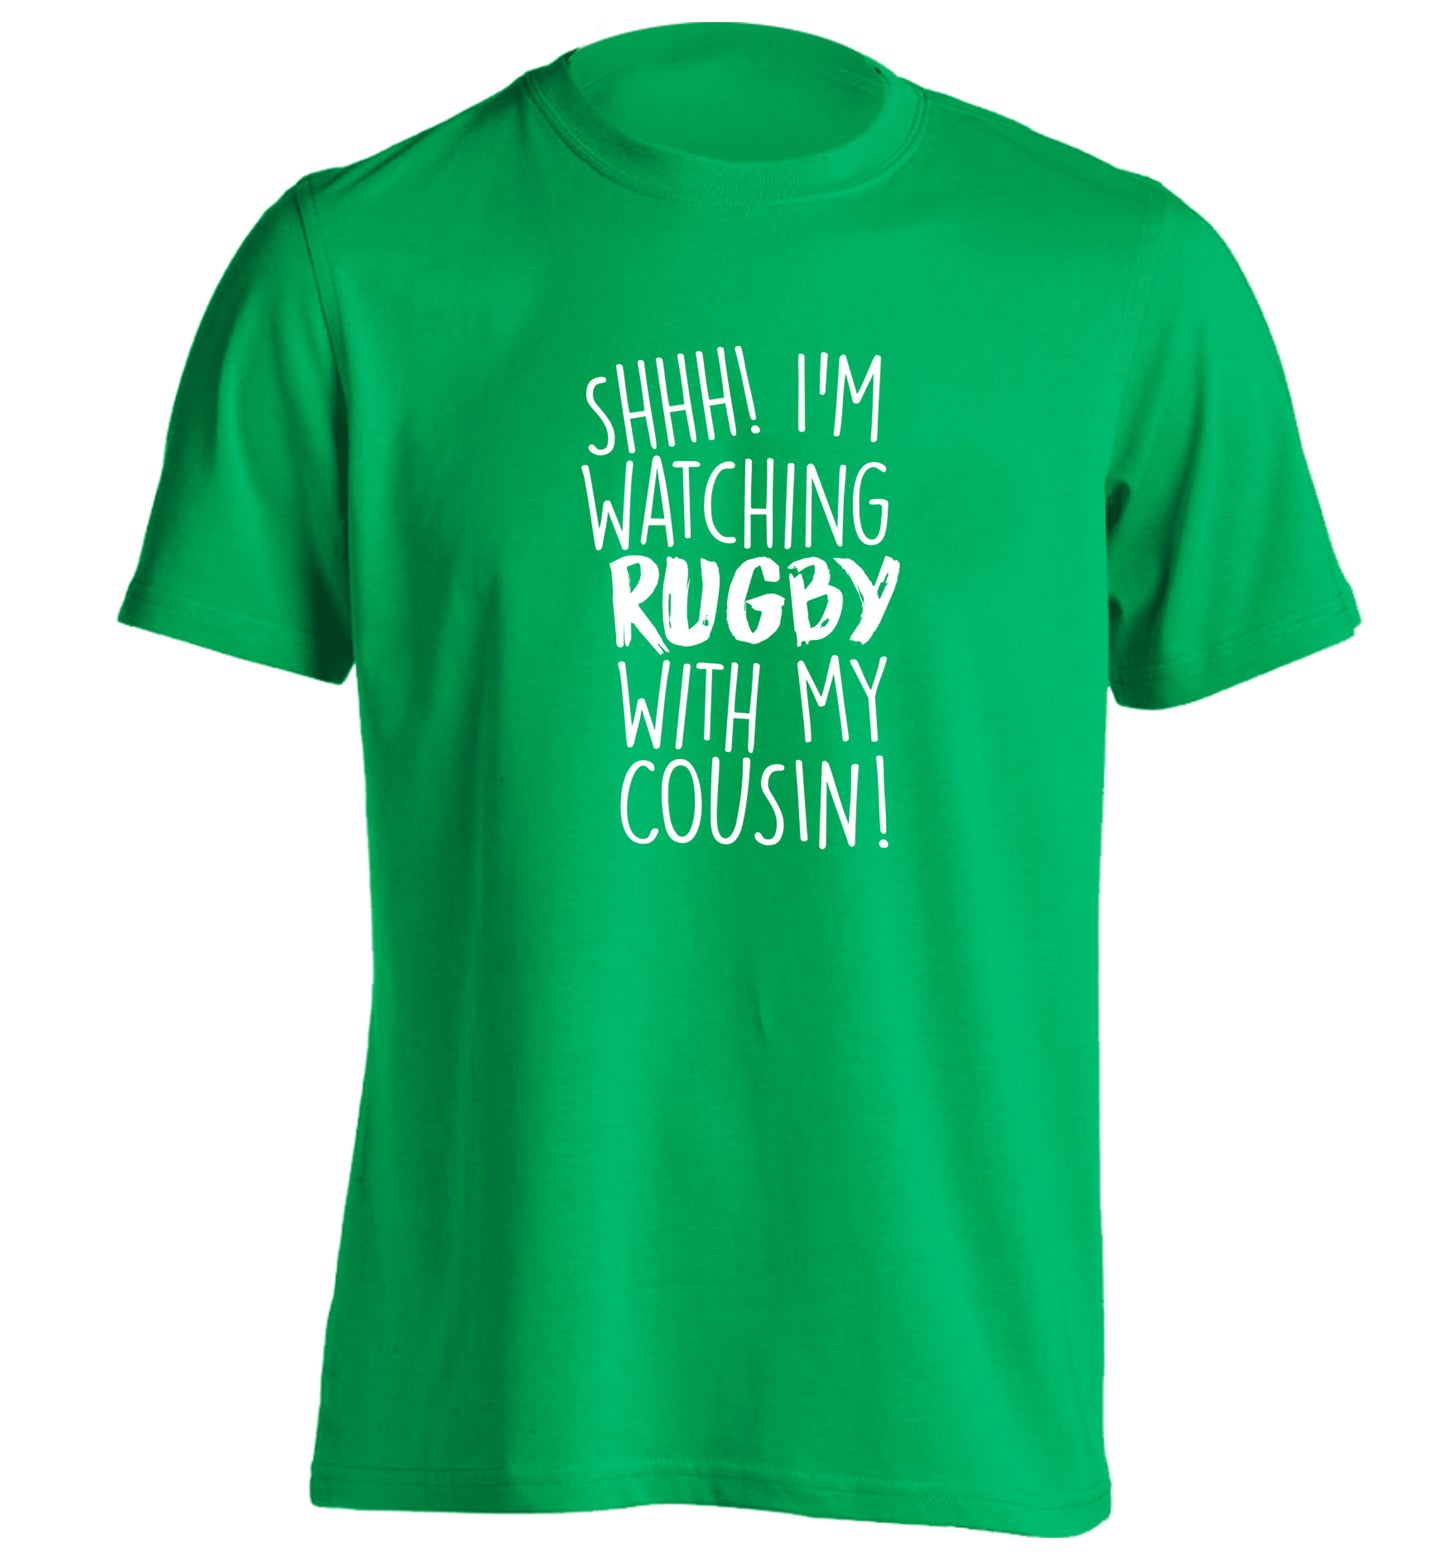 Shhh I'm watching rugby with my cousin adults unisex green Tshirt 2XL